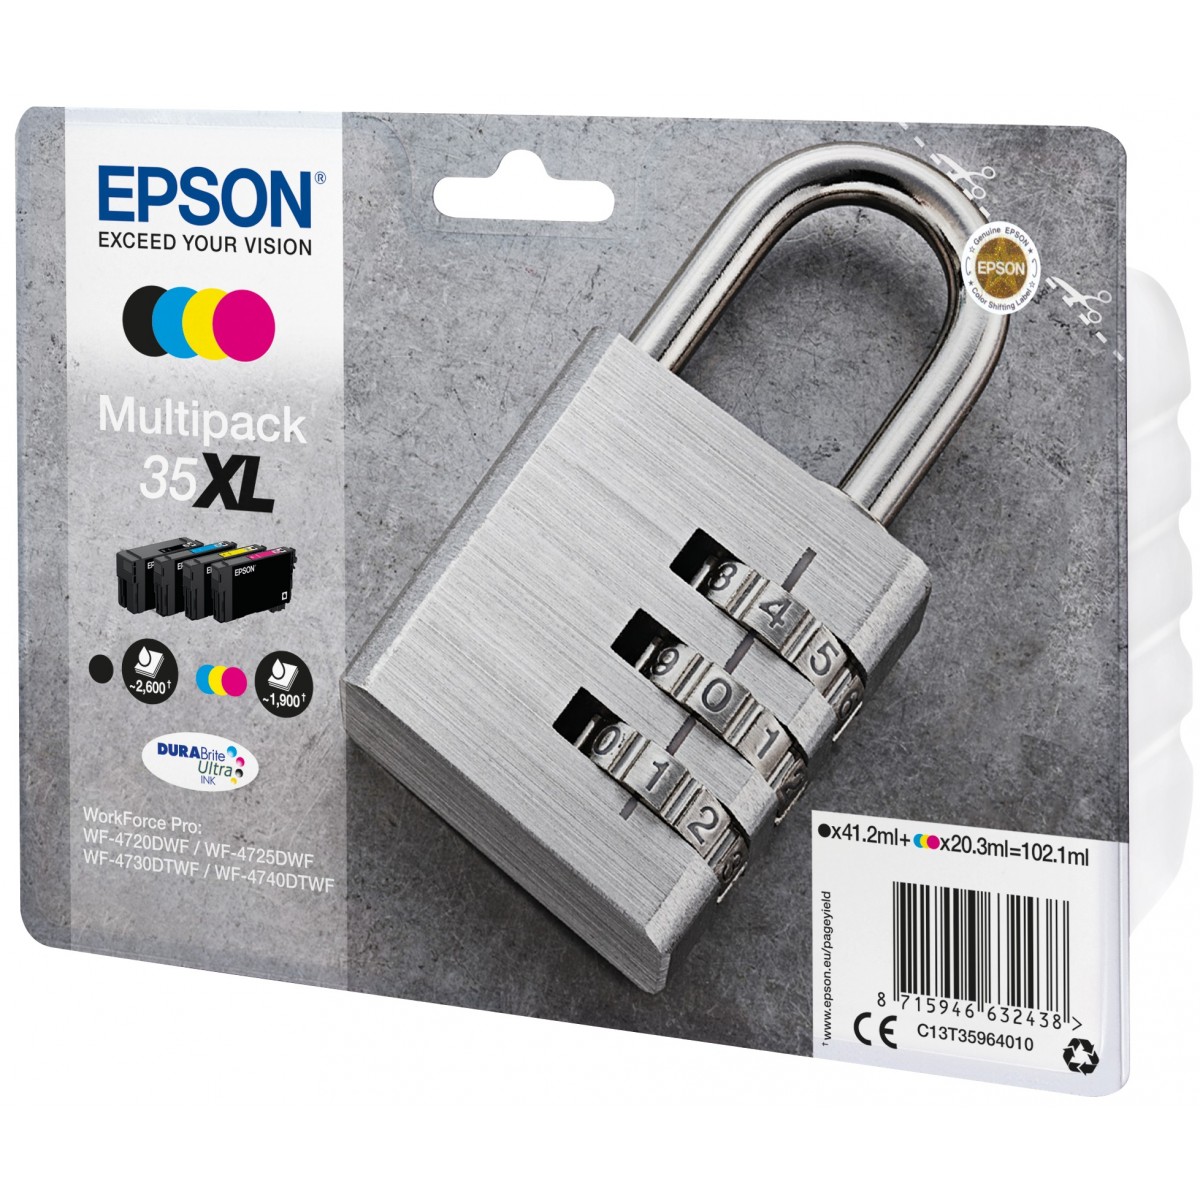 Epson Padlock Multipack 4-colours 35XL DURABrite Ultra Ink - High (XL) Yield - Pigment-based ink - 41.2 ml - 20.3 ml - 4 pc(s) -